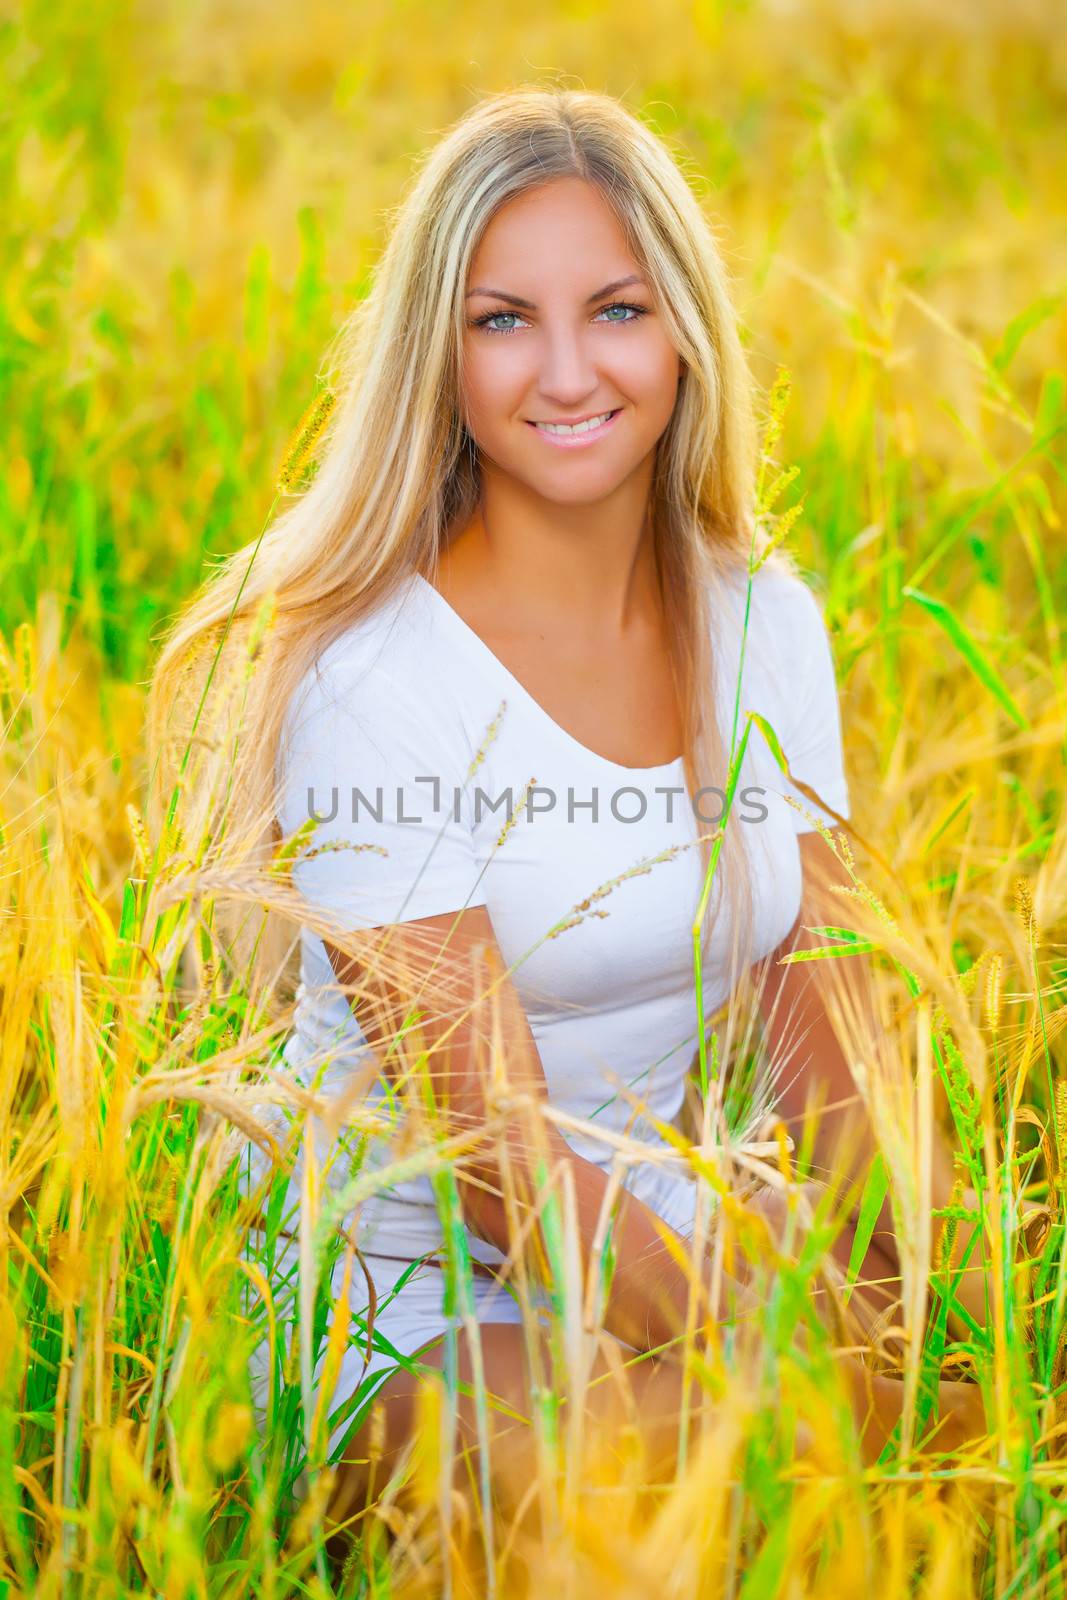 a romantic girl in the field whea by mihalec